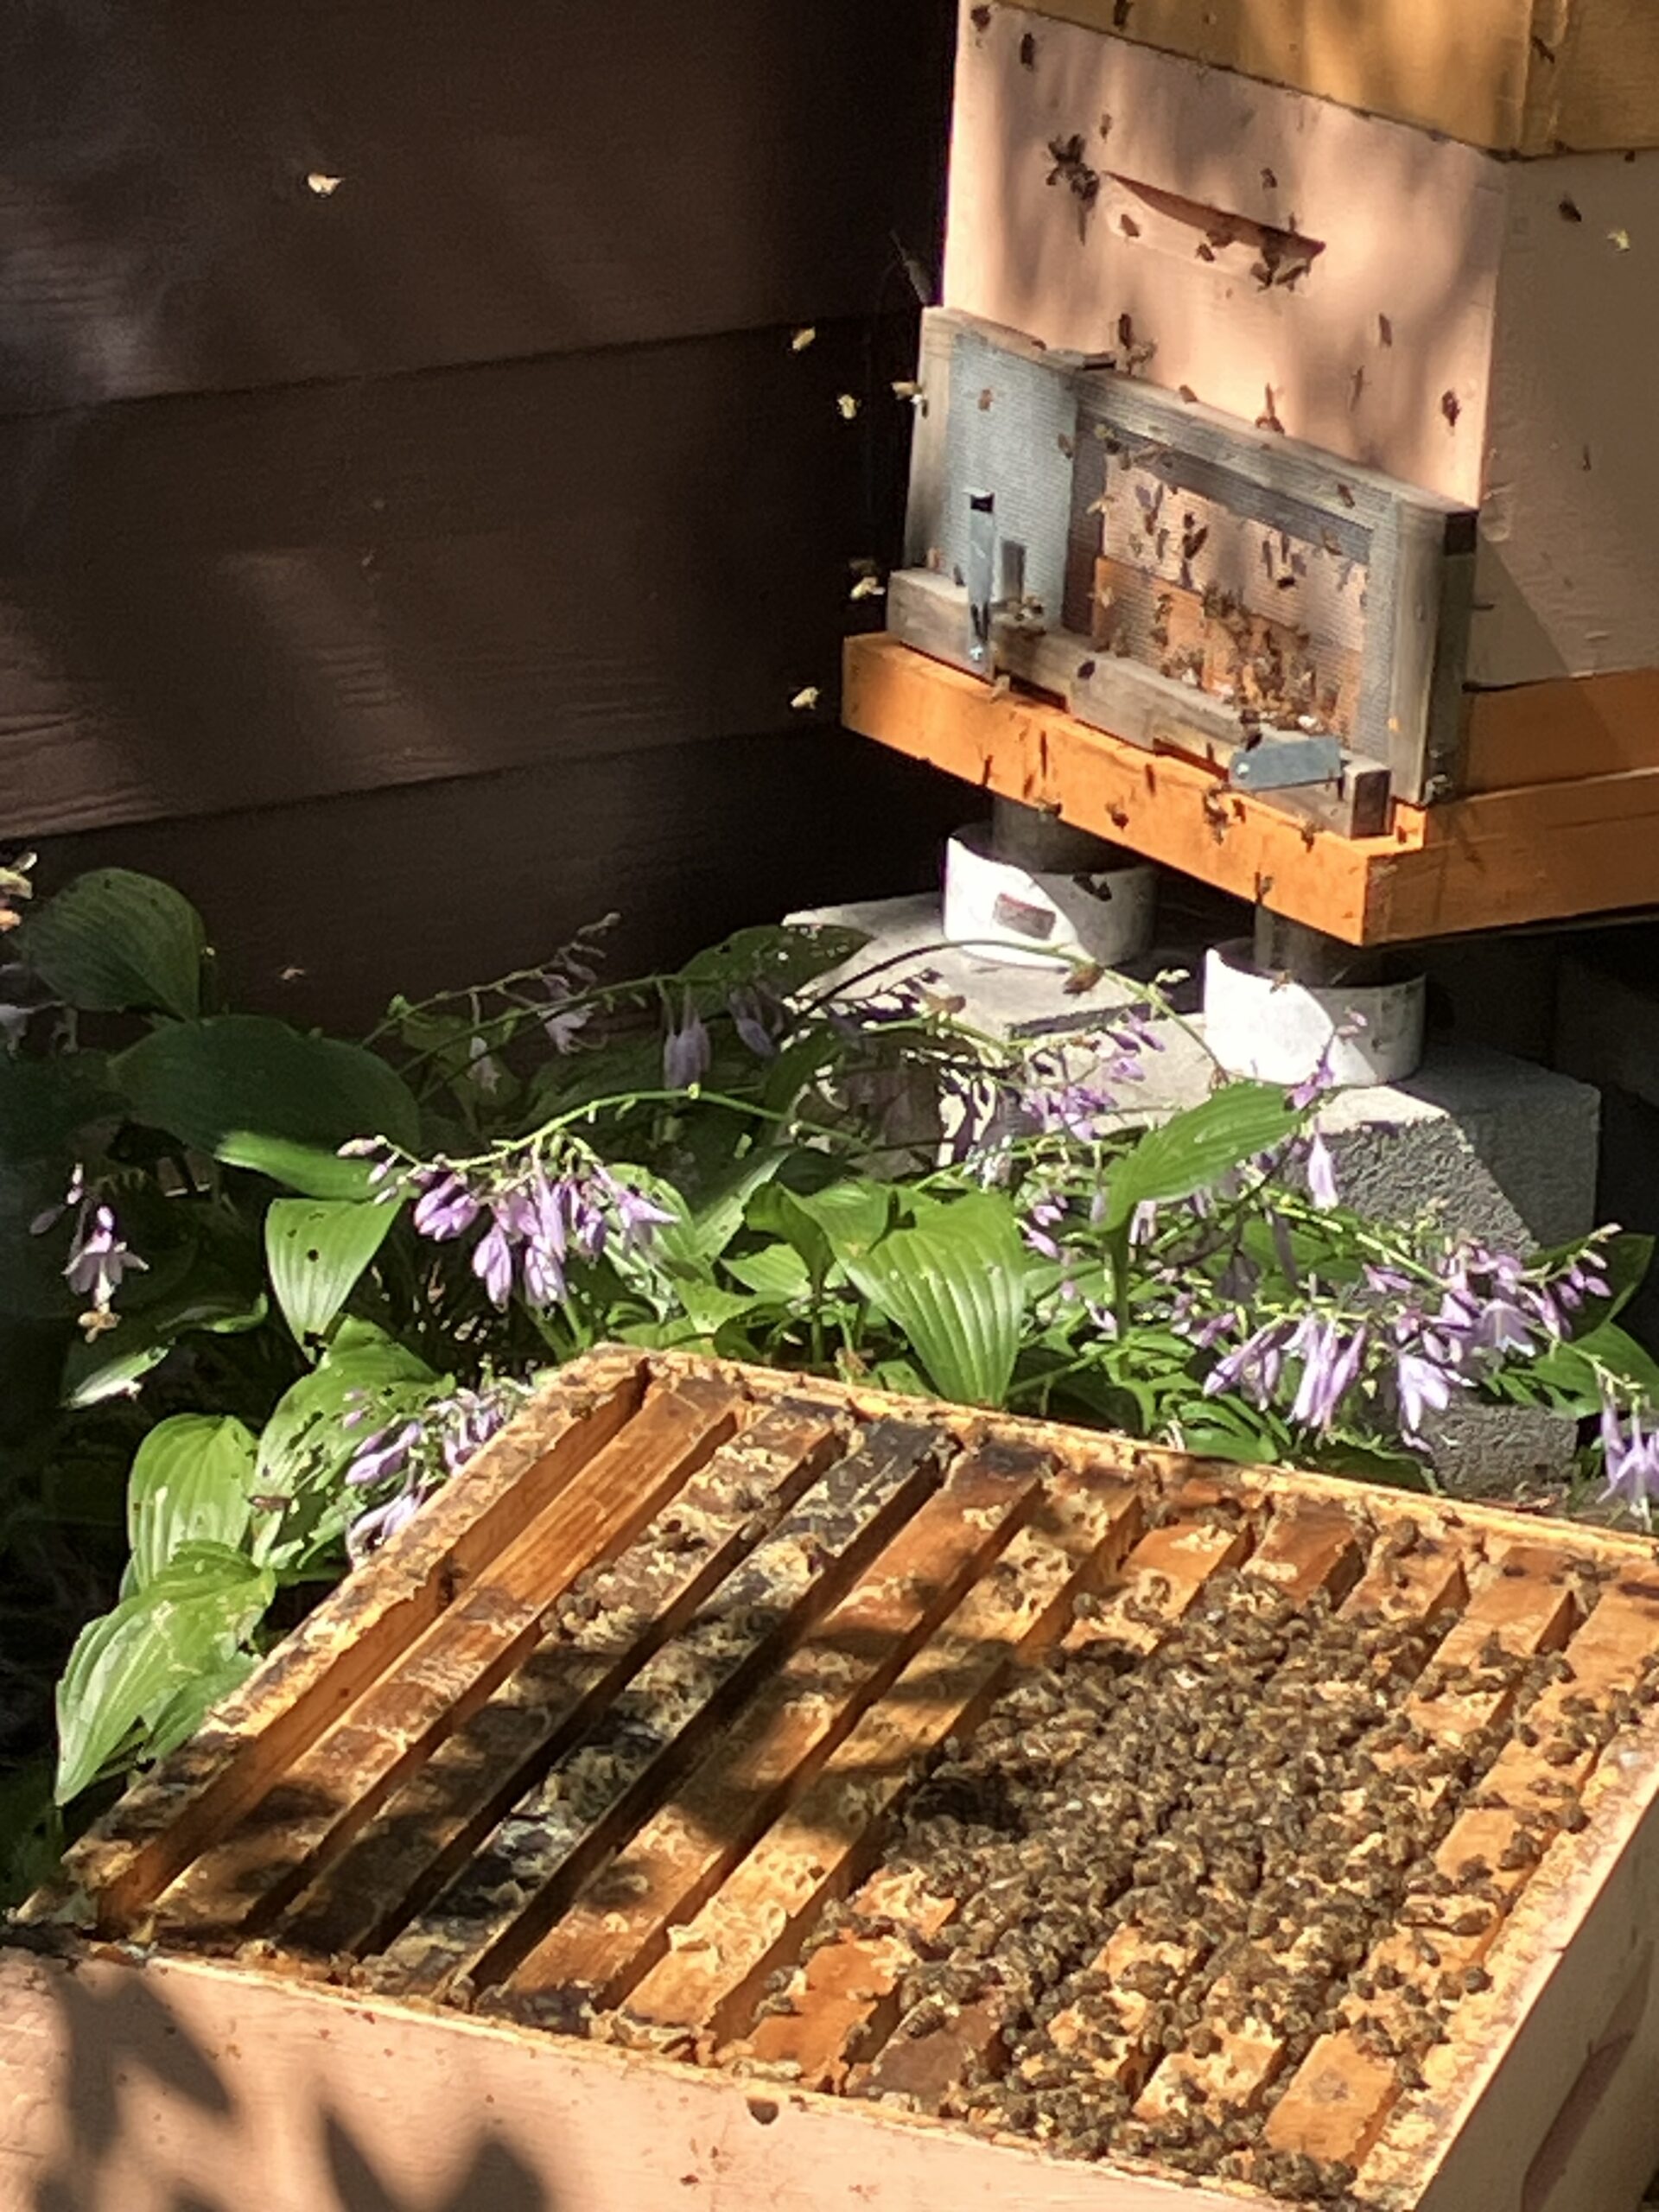 Beekeeper’s  beehives can stay but farther away from neighbor’s pool: Report